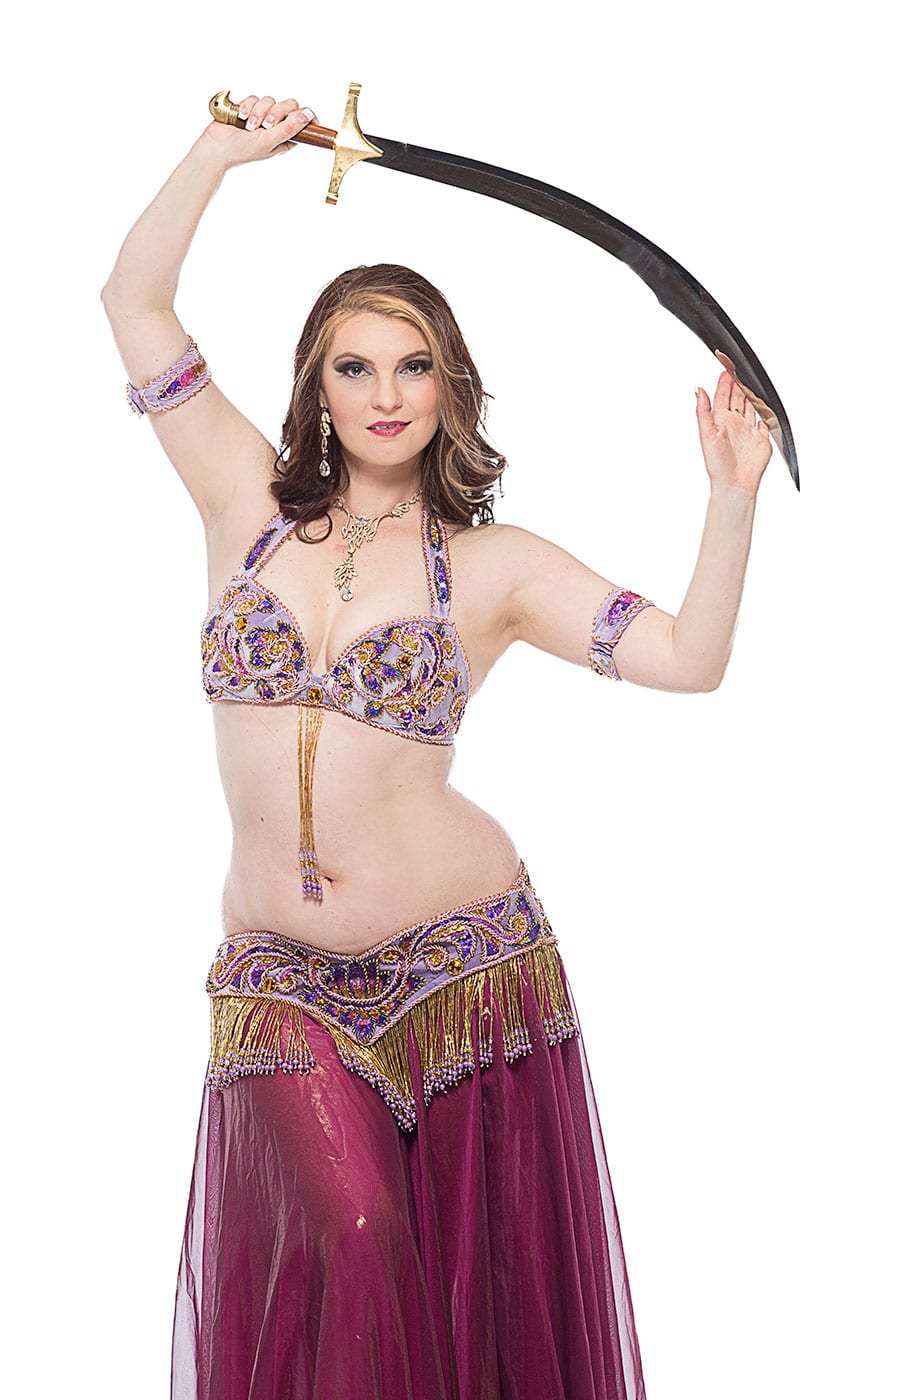 Candy C. recommend best of belly dancer sadie